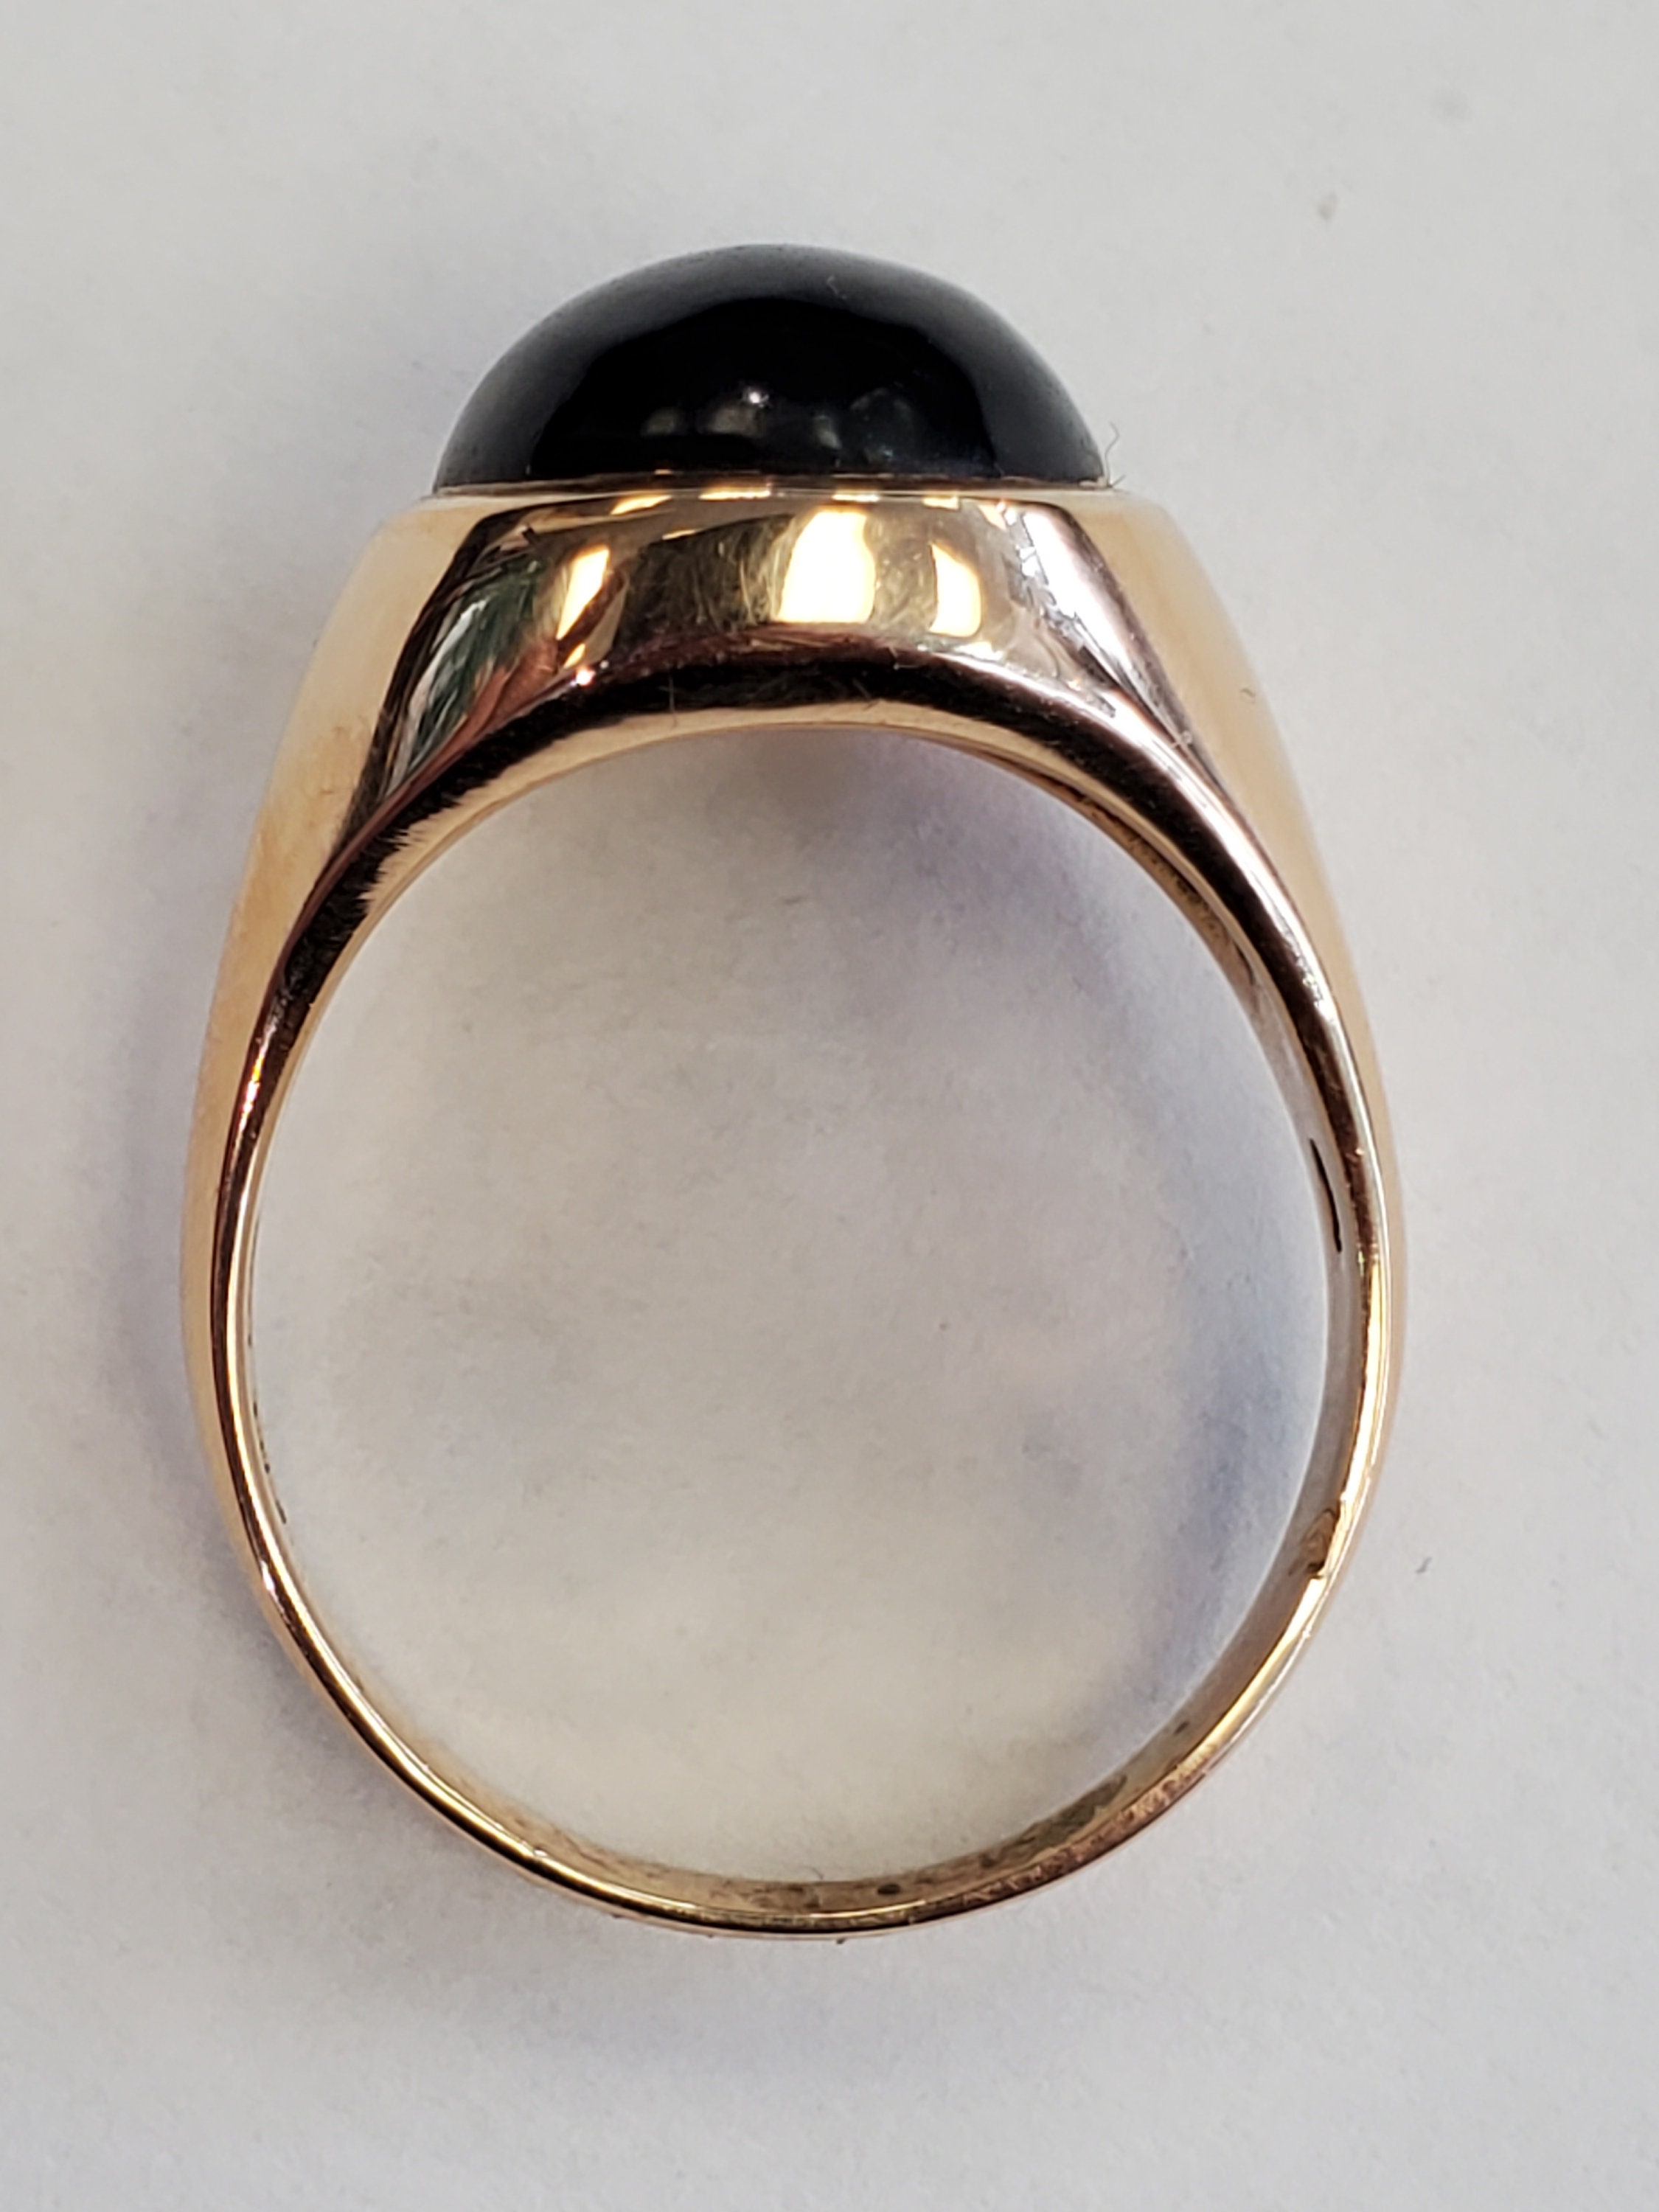 Product Image for Black Coral 7ct Ring 14k Yellow Gold Size 9.5